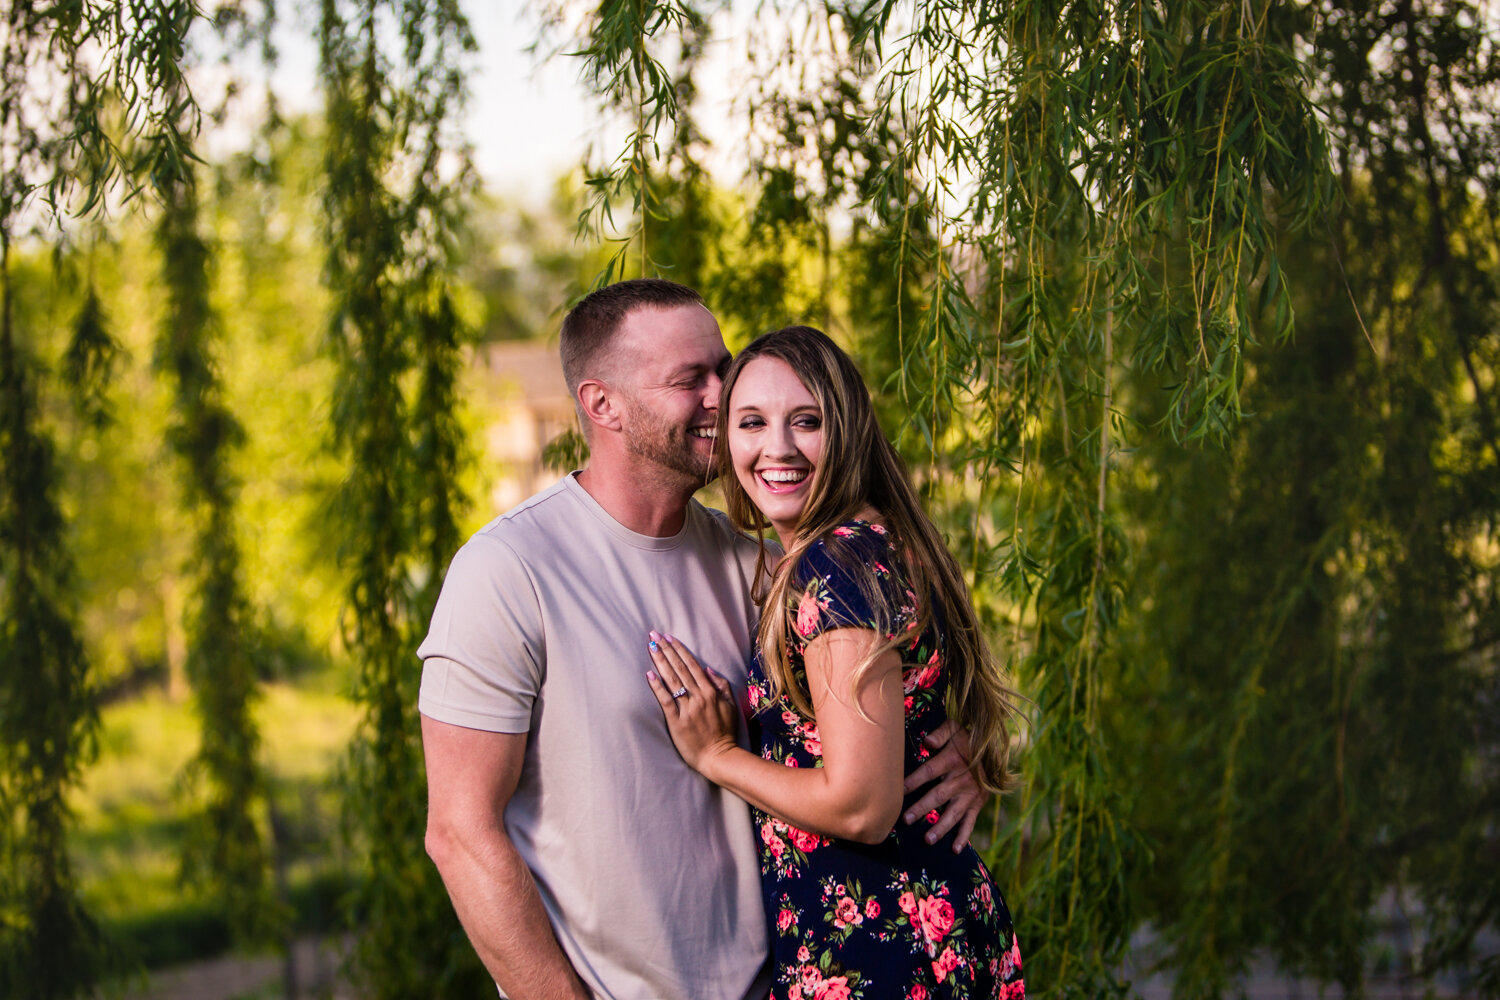  Engagments with willow tree at Sandstone Ranch. Take by Jared M. Gant 